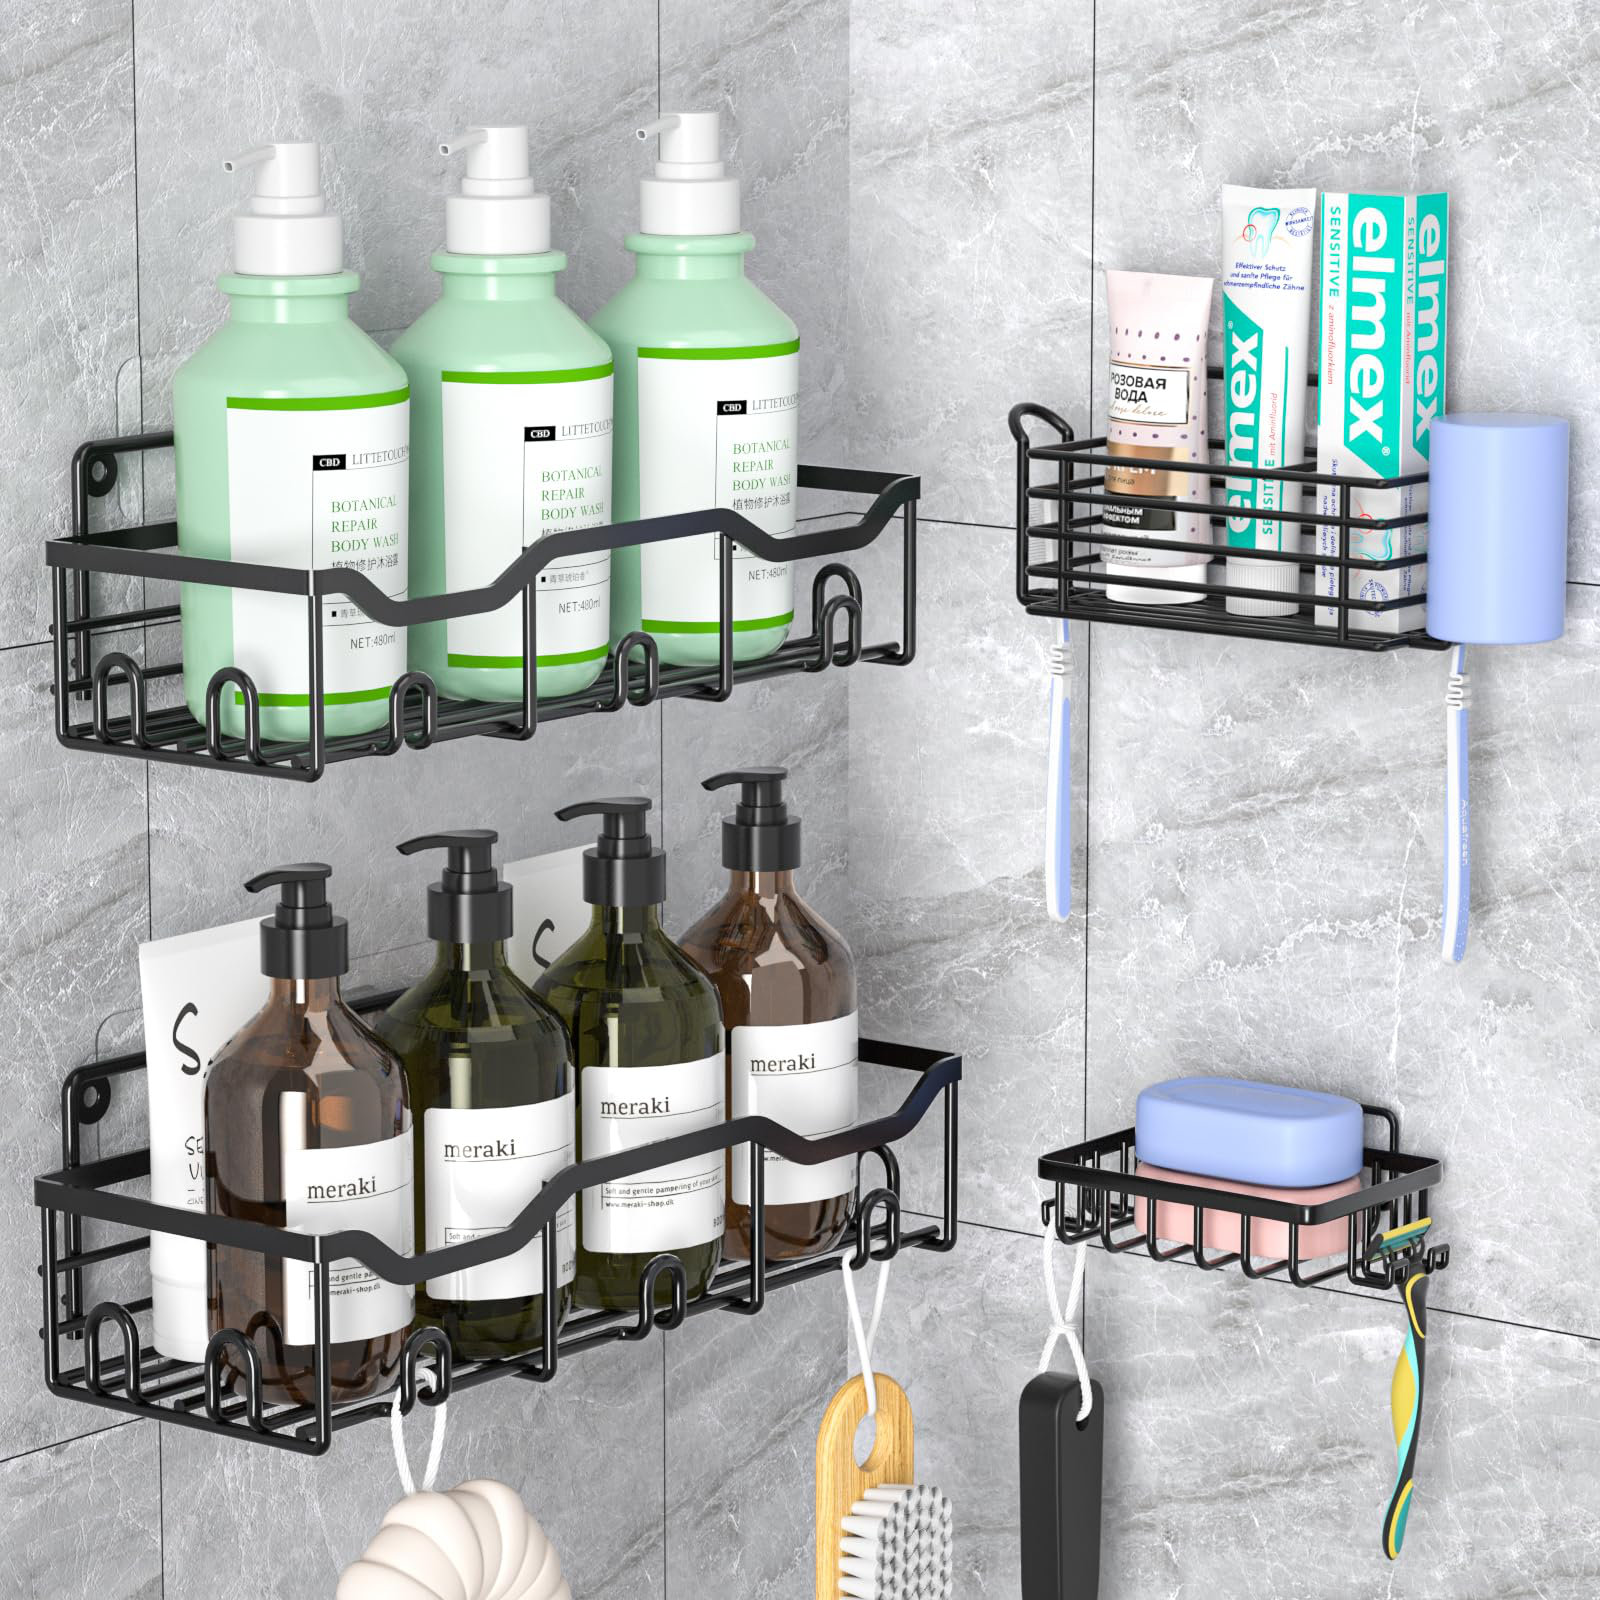 Rebrilliant Shower Caddy, 5 Packs Shower Organizers with 3 Shower Shelves 2 Soap Dishes & 6 Hooks, Stainless Steel Wall Rack Basket with Adhesives or Screws Mount